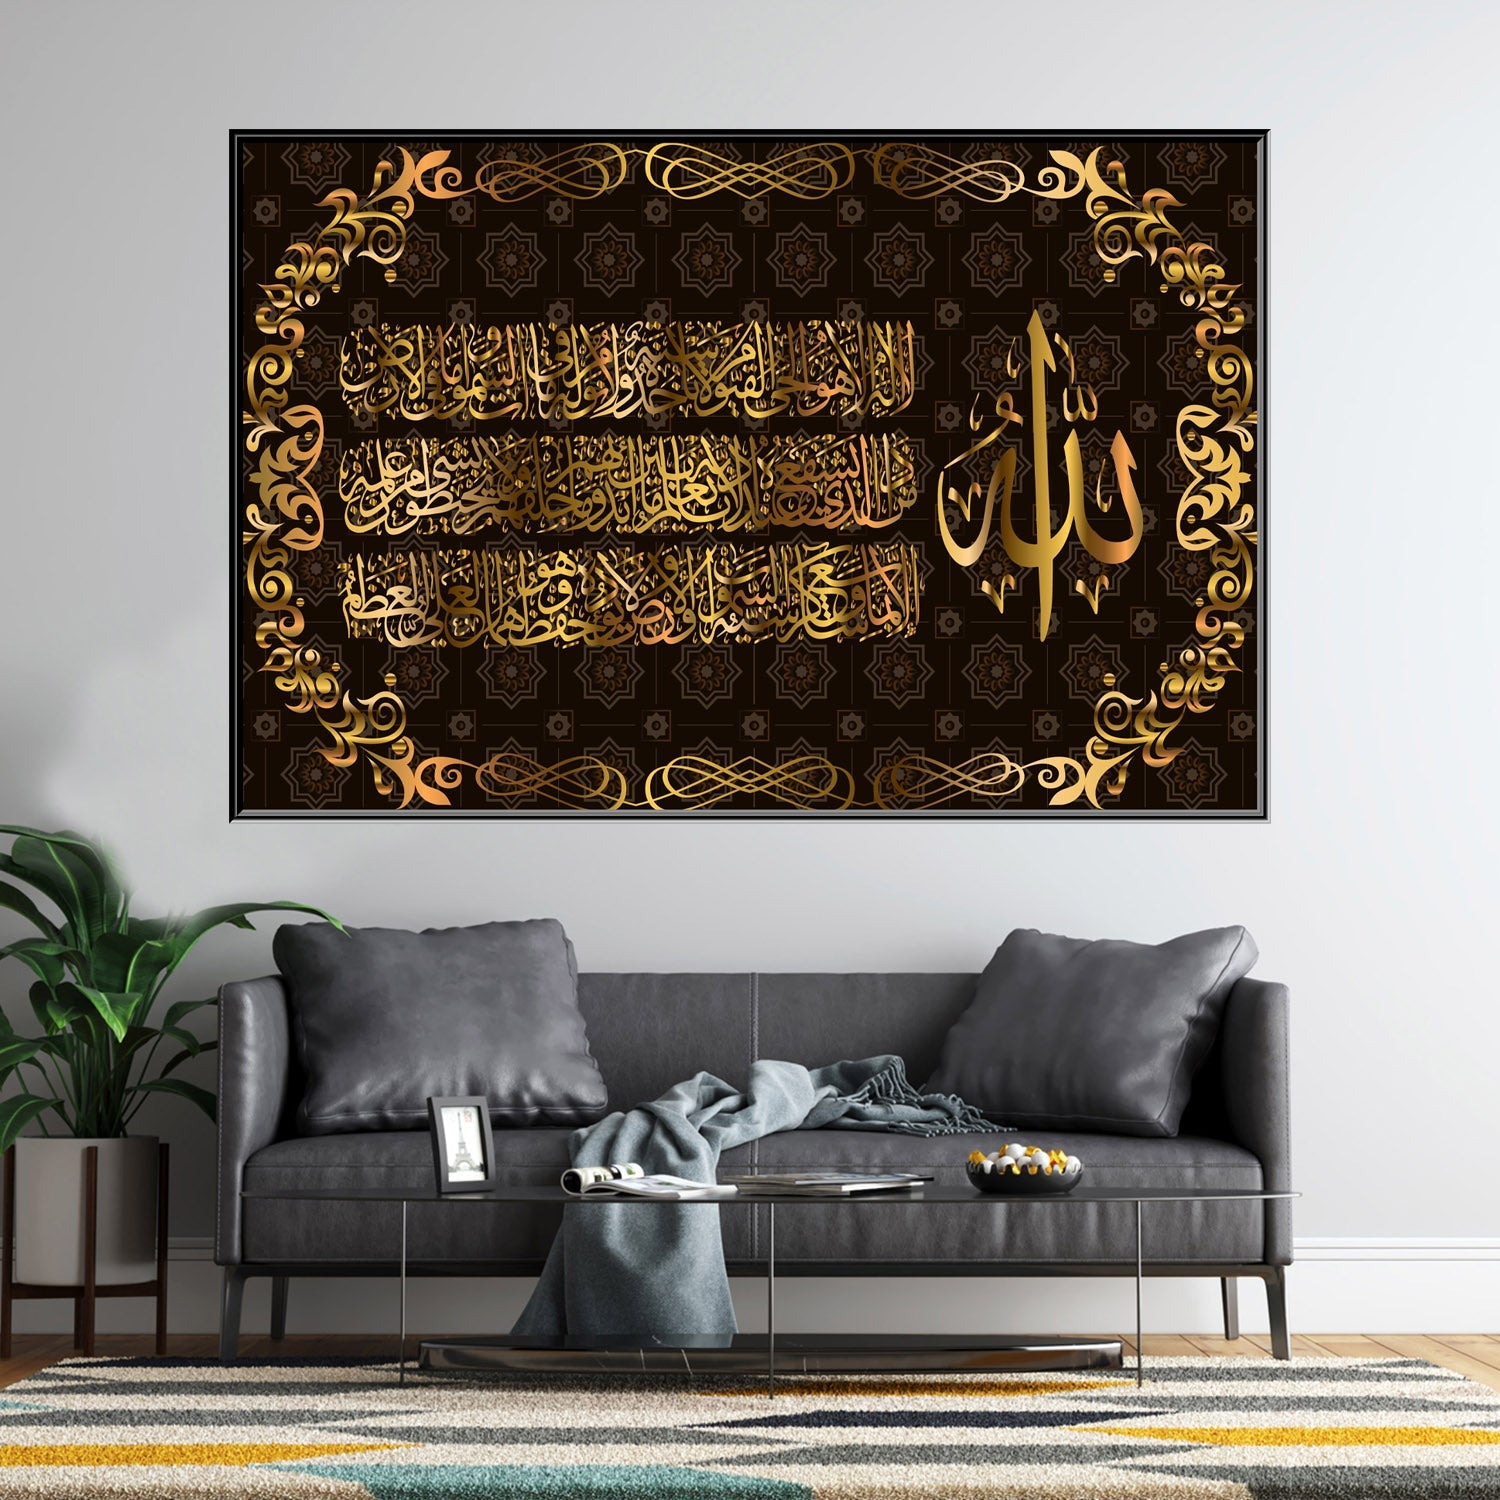 https://cdn.shopify.com/s/files/1/0387/9986/8044/products/ThroneofAllahCanvasArtprintStretched-2.jpg